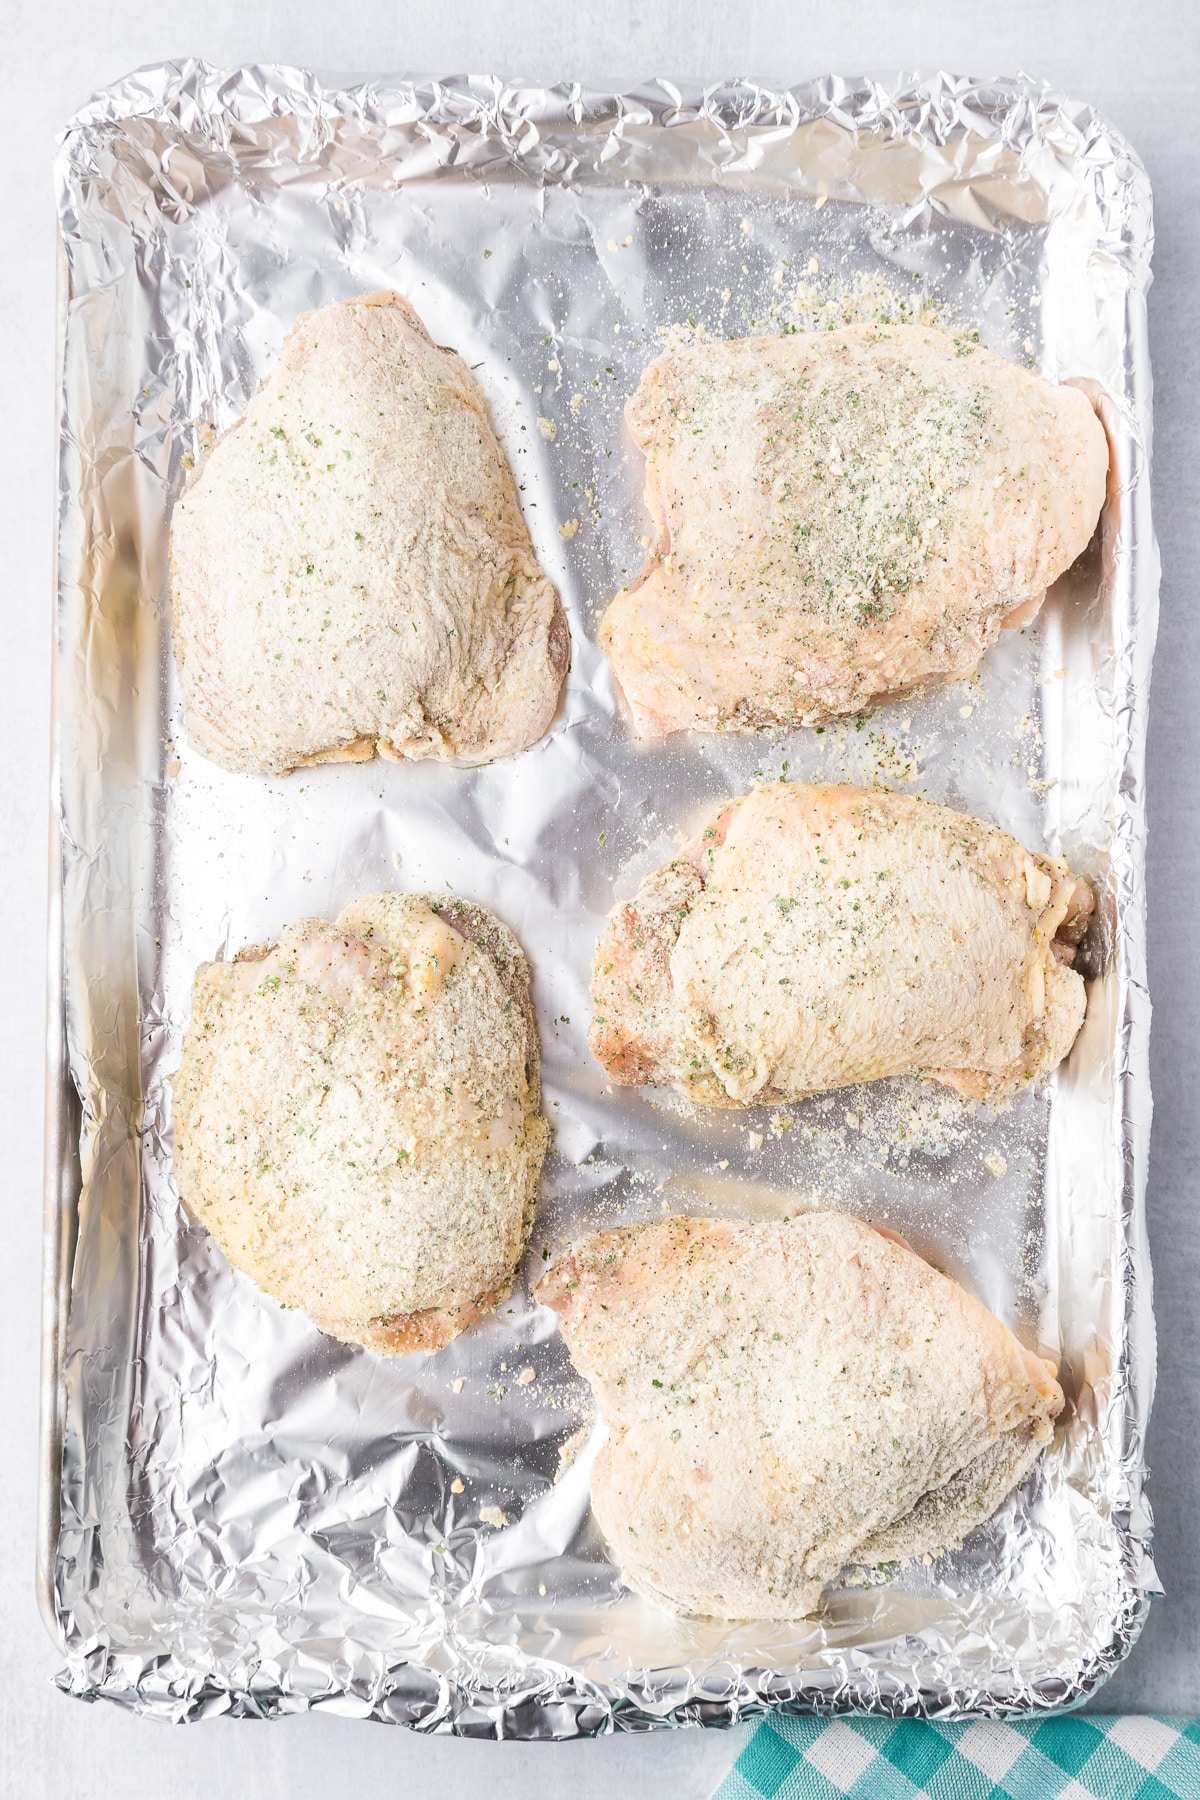 Five seasoned chicken thighs on a foil-lined baking tray, ready to be cooked.